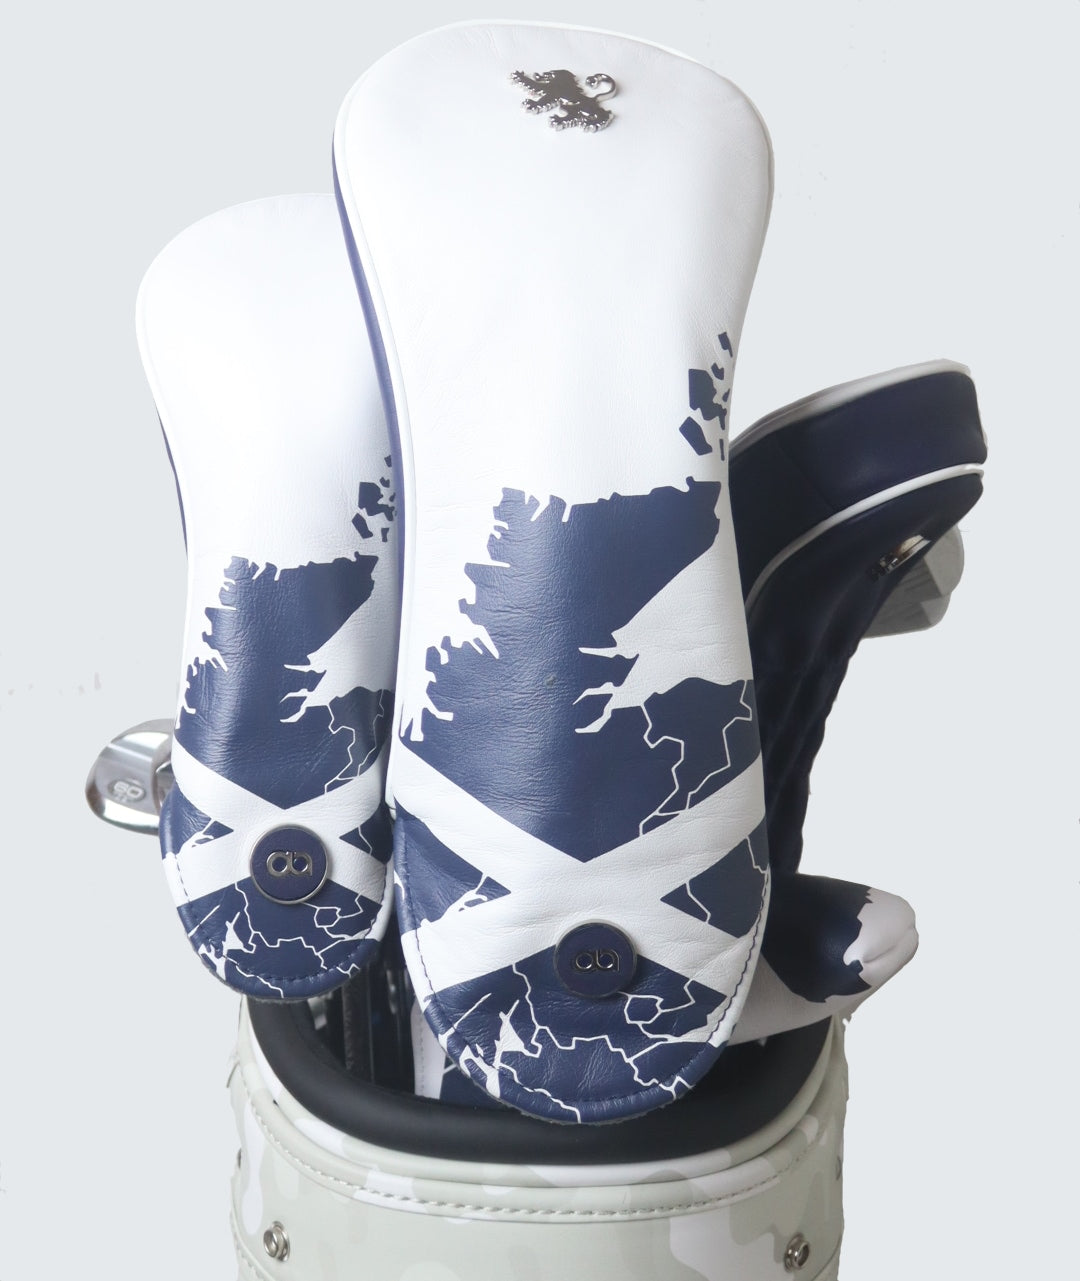 Set of Scotland white and navy blue leather headcovers by David Alexander